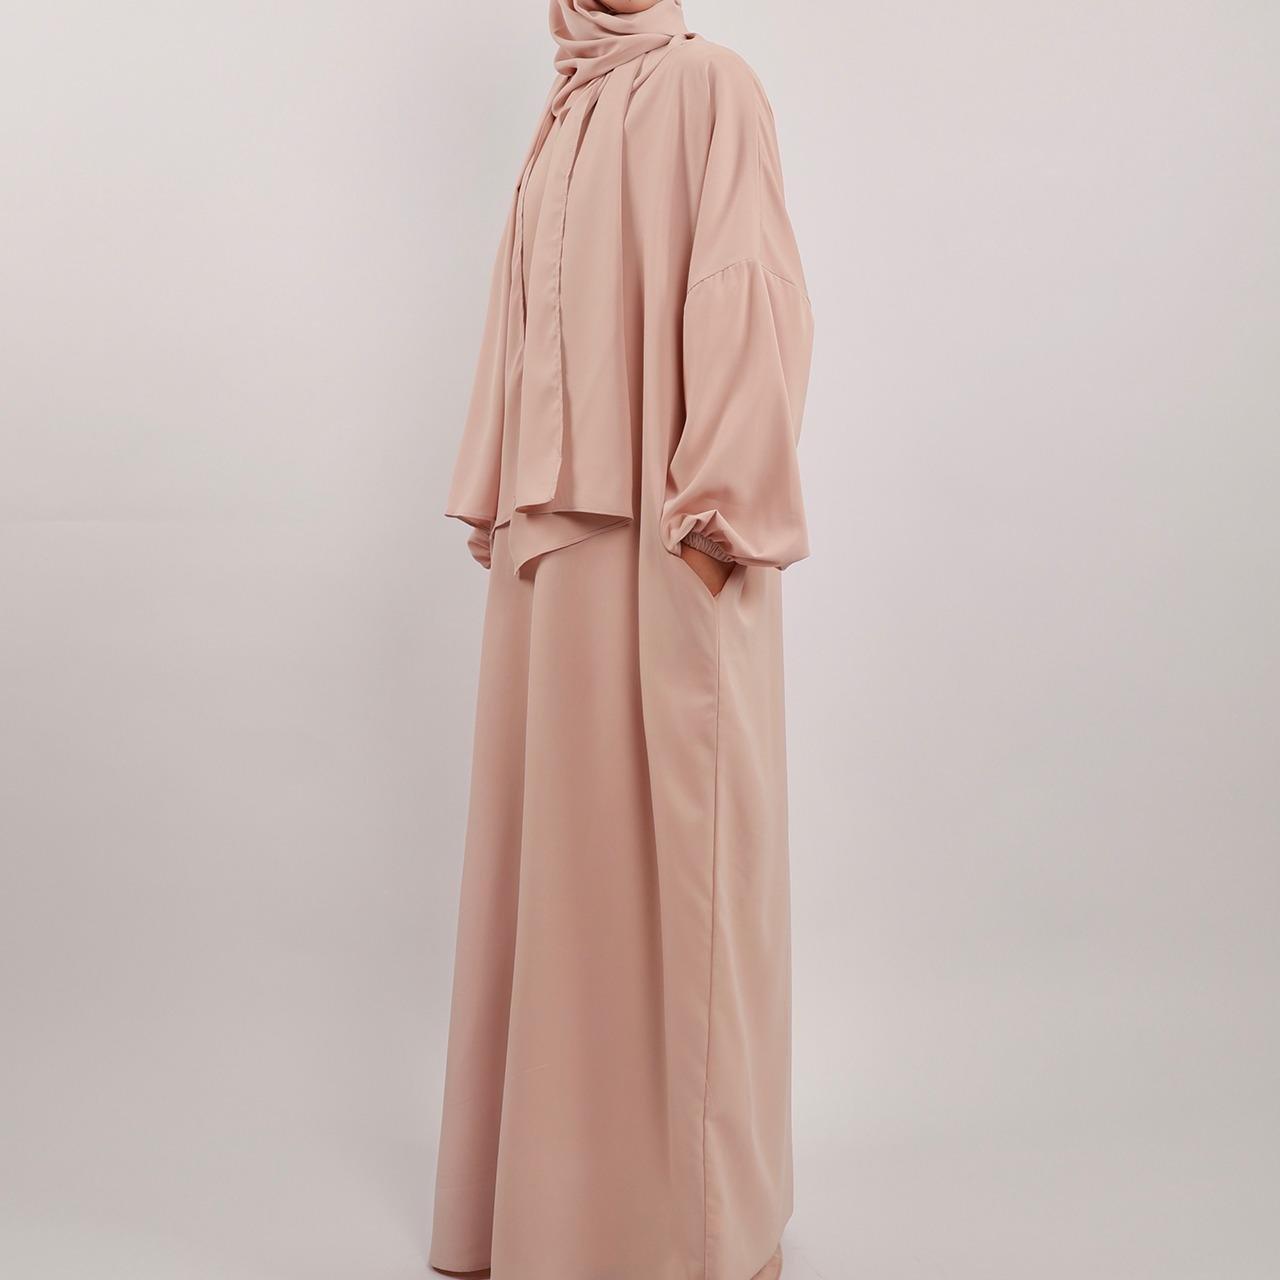 MA001 Hijab Attached Hoodie Abaya With Pockets - Mariam's Collection